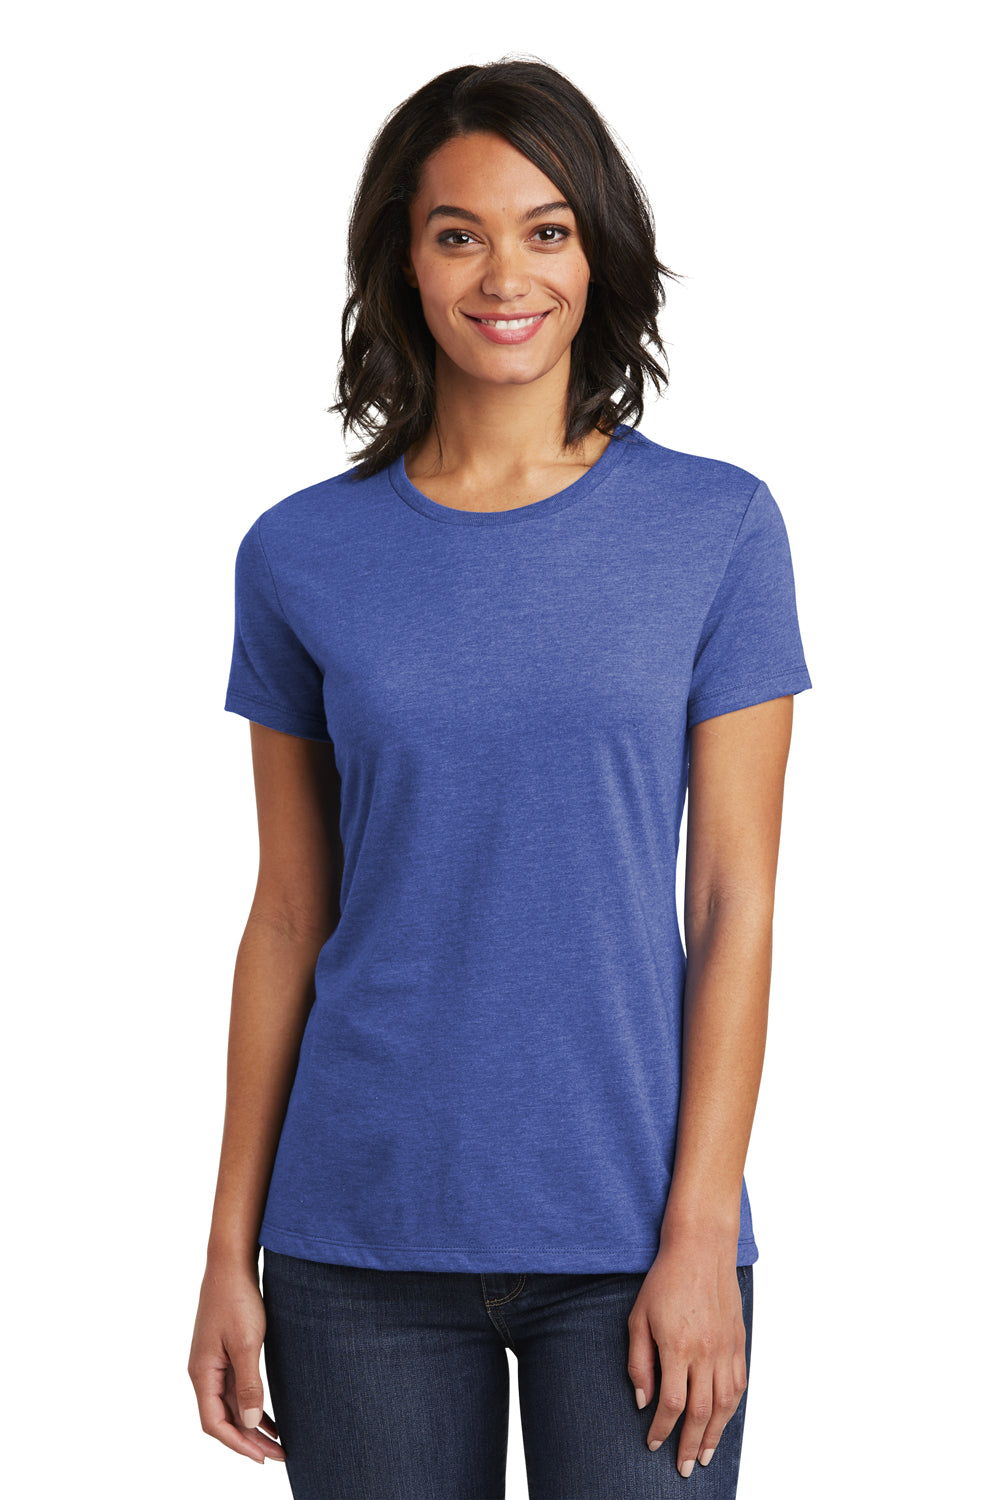 District DT6002 Womens Very Important Short Sleeve Crewneck T-Shirt Heather Royal Blue Front